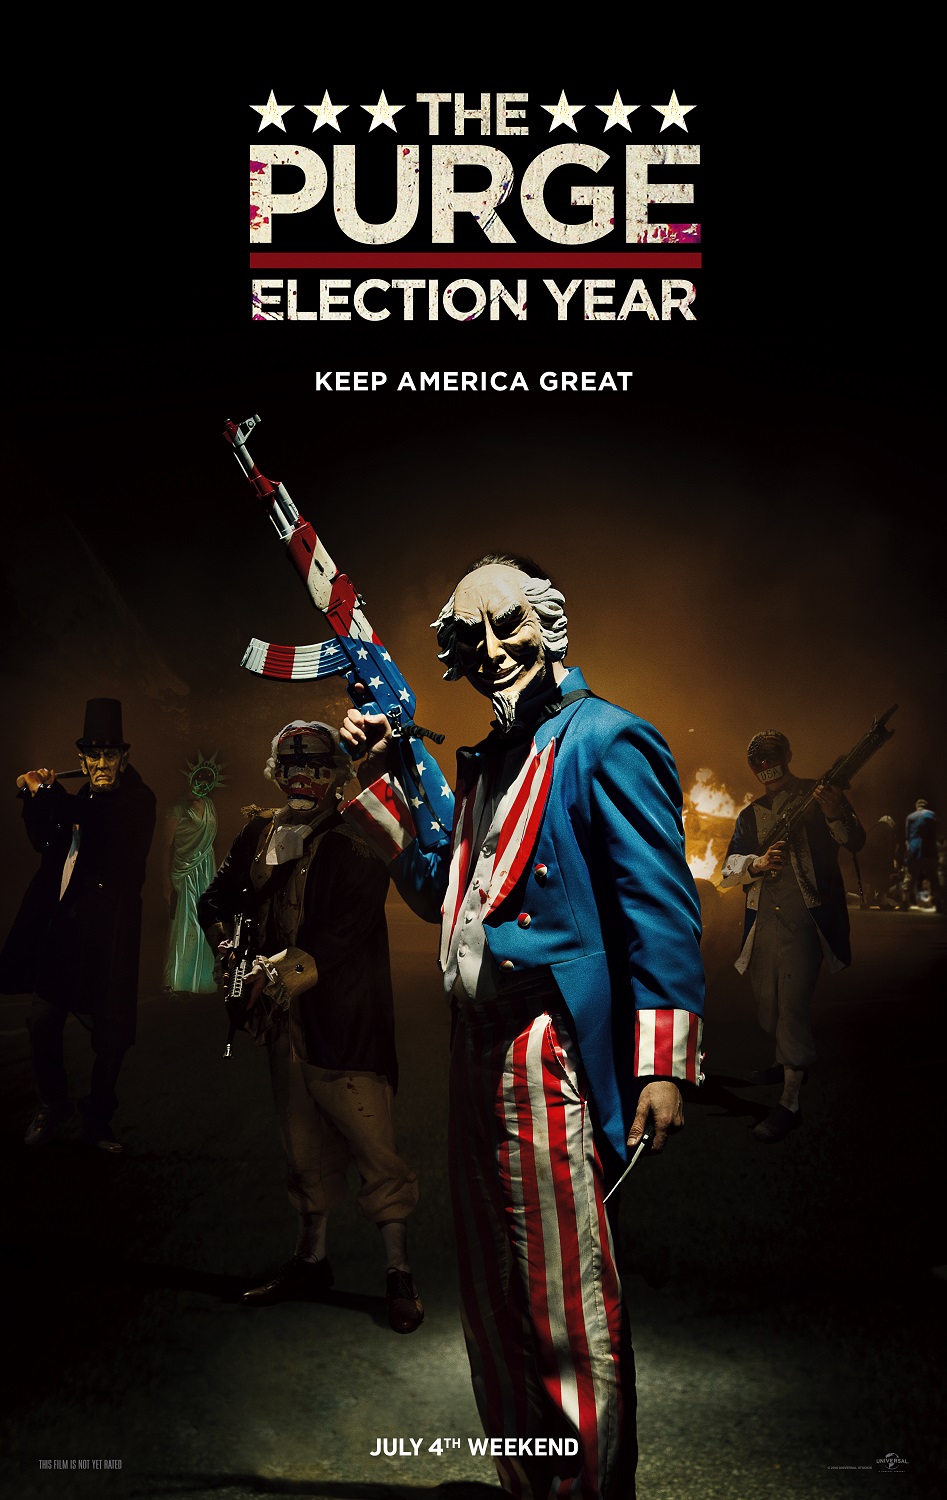 The Purge Election Year - Keep America Great